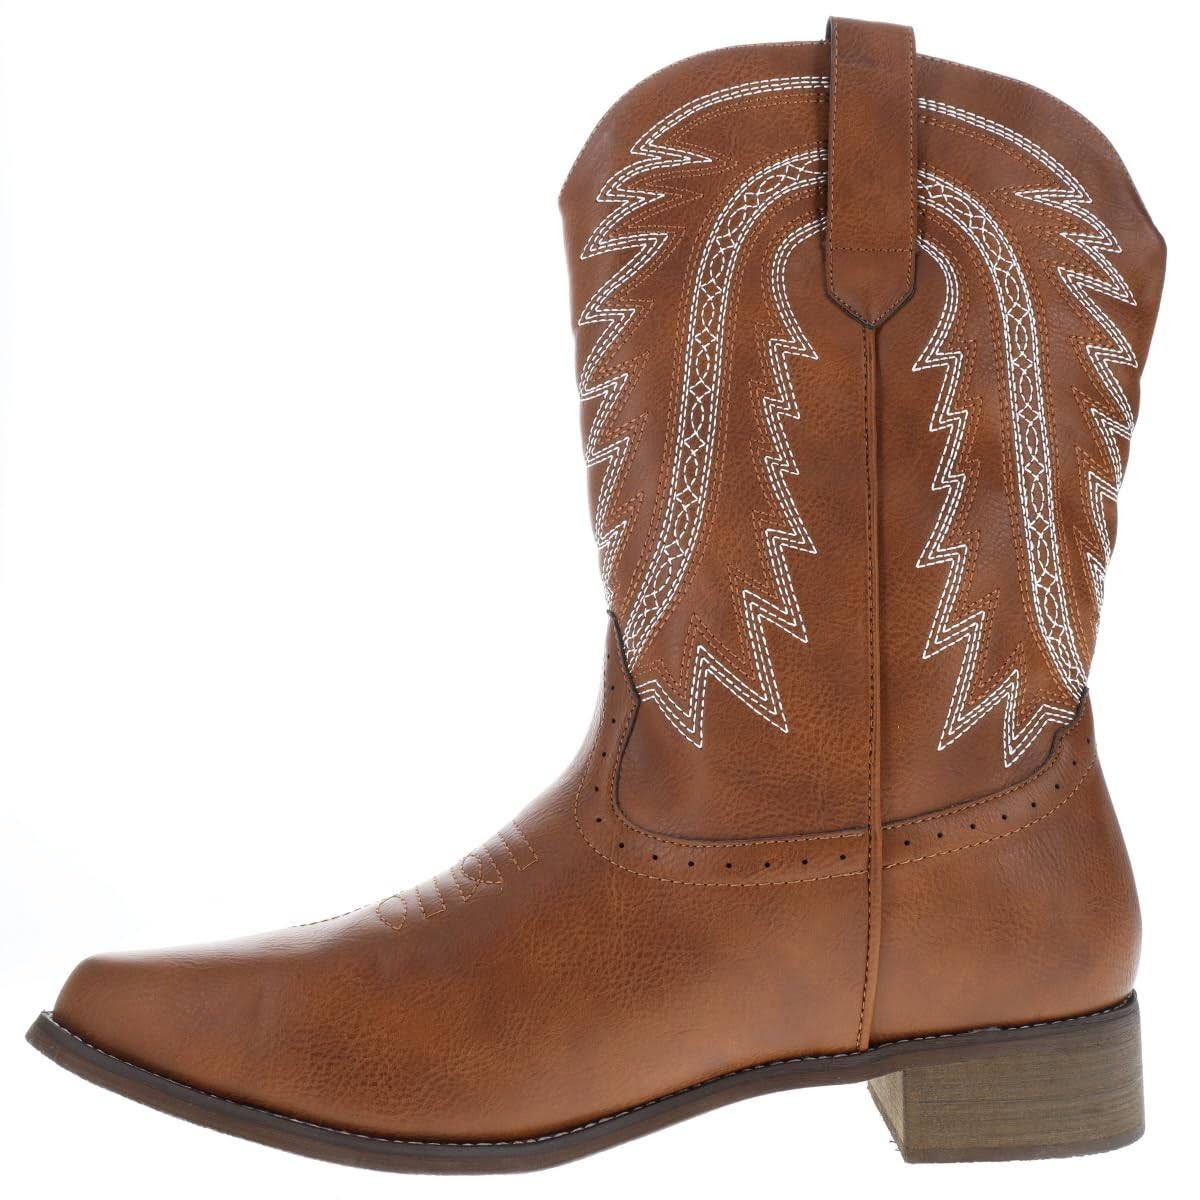 Classic Brown Square-Toe Cowboy Boots for Men | Image